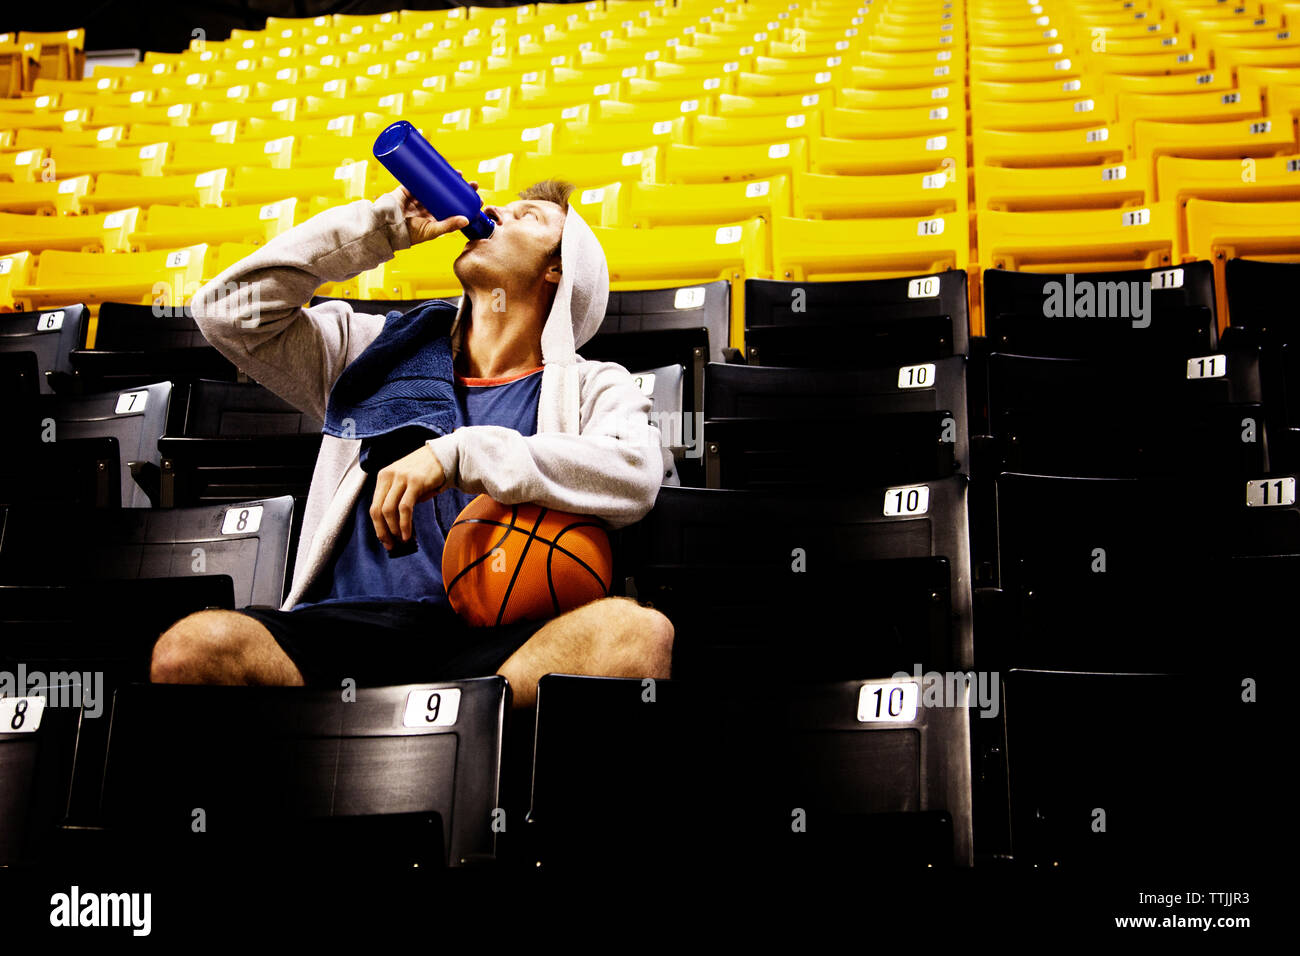 Man with basketball drinking water while sitting on seat in stadium Stock Photo